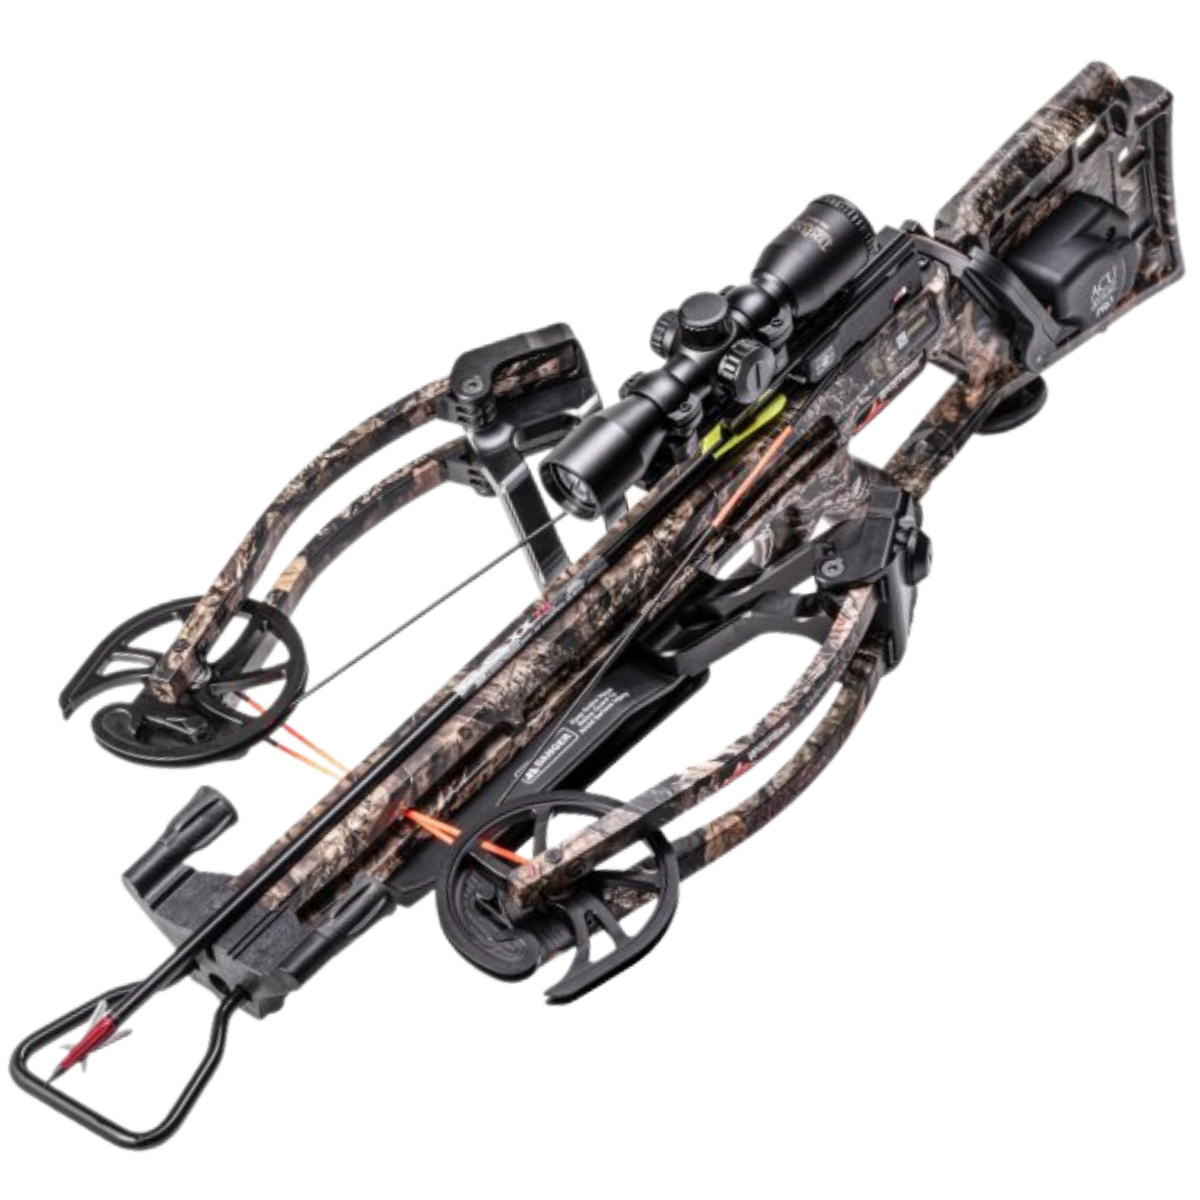 Wicked Ridge RDX 400 Compound Crossbow Package 400fps - Fast UK Shipping | Tactical Archery UK